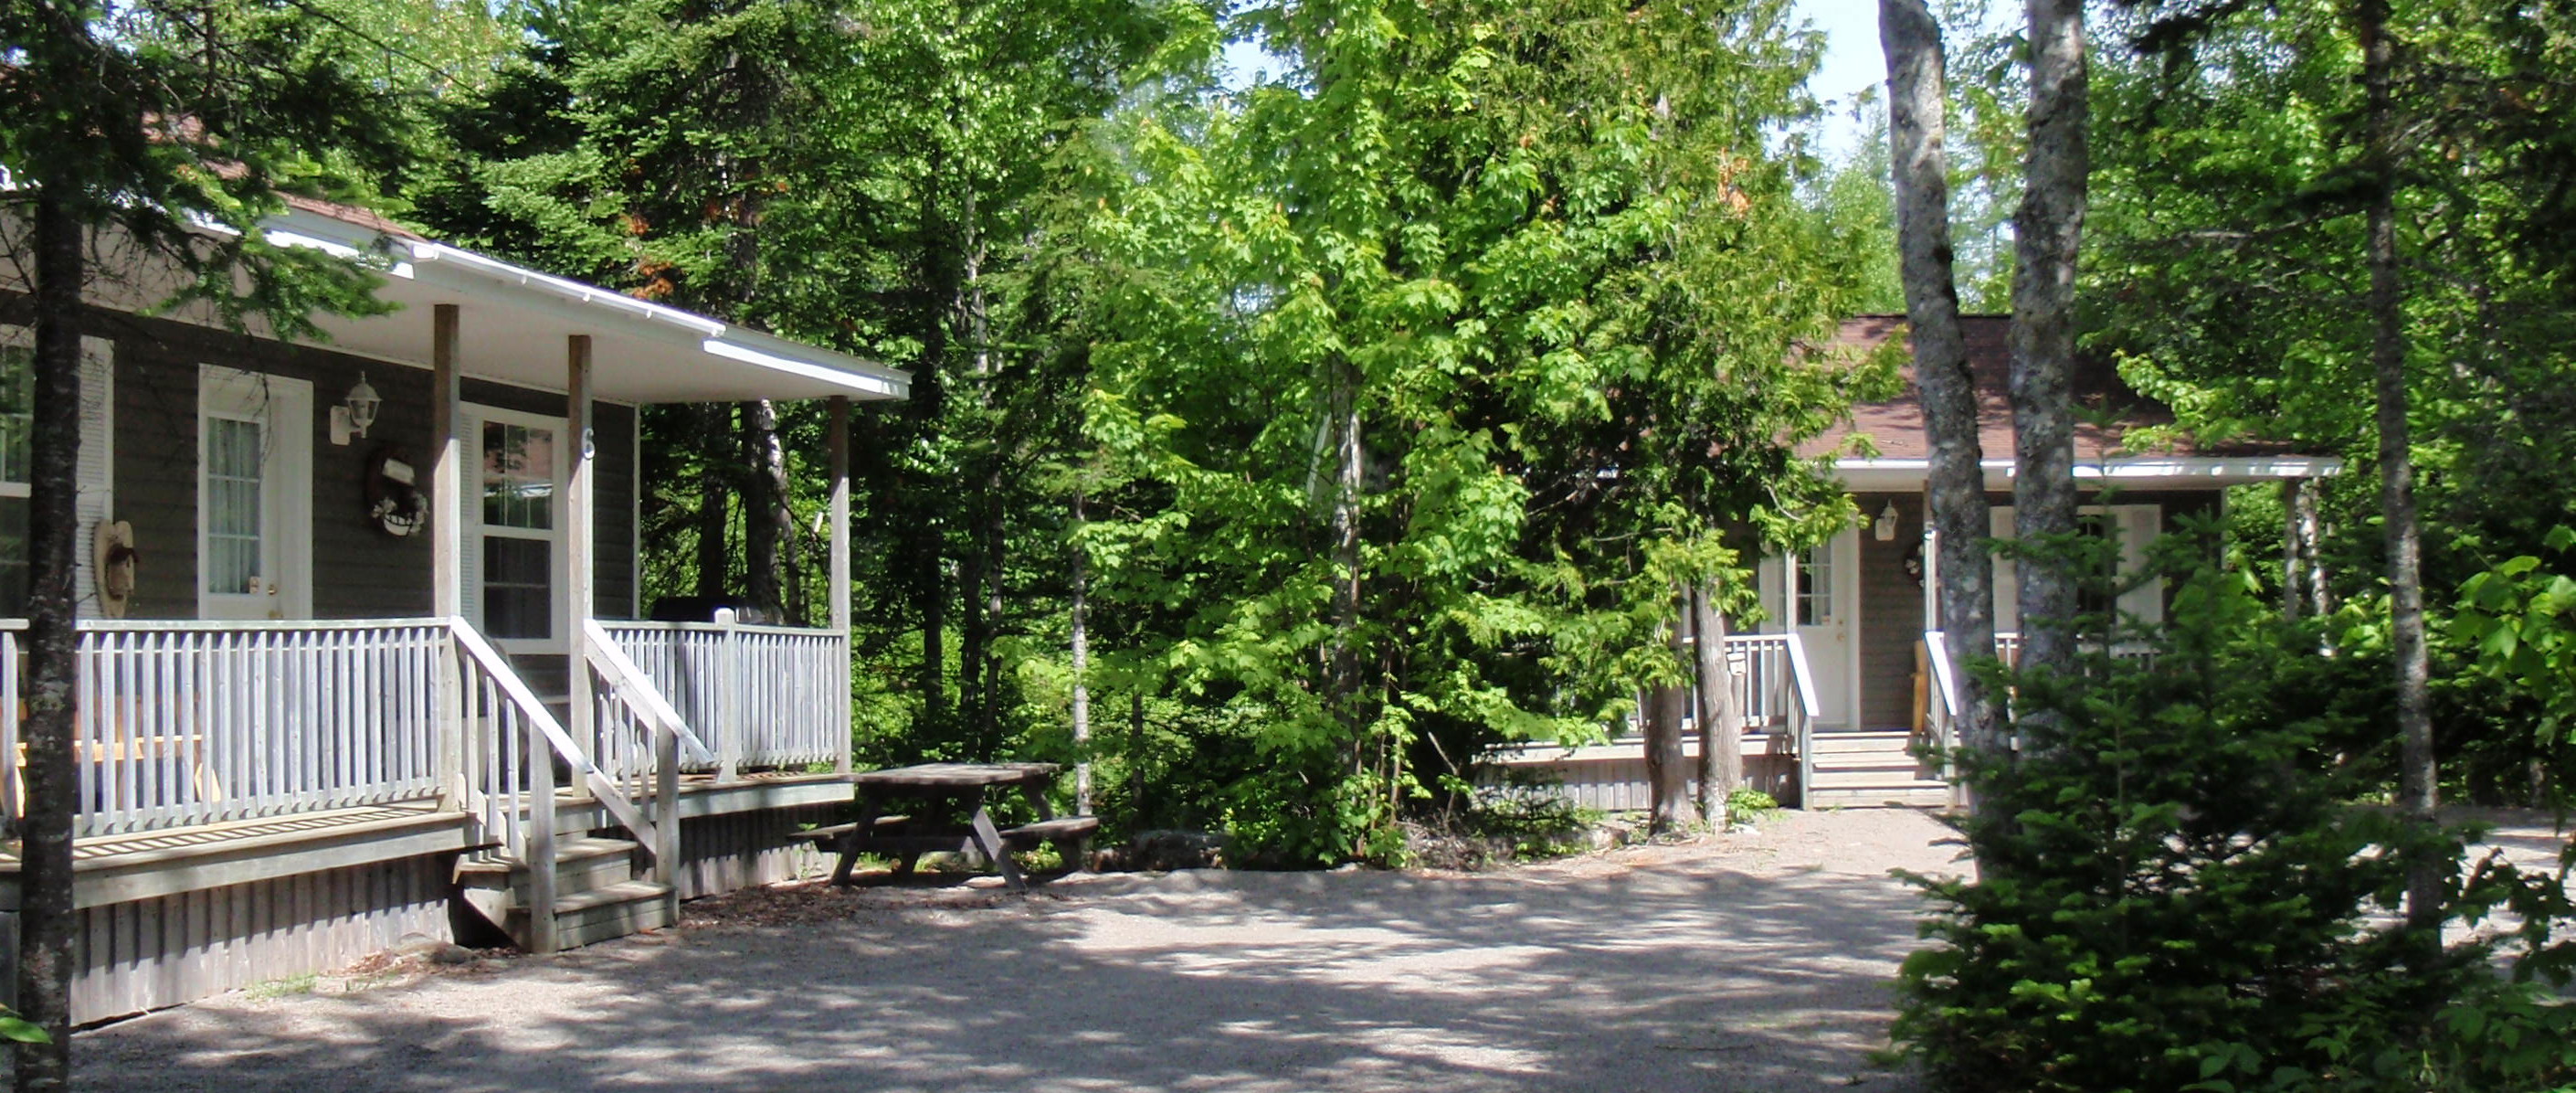 Beautiful accommodations on a private woodlot just 1km from the historic town of St Andrews by the Sea